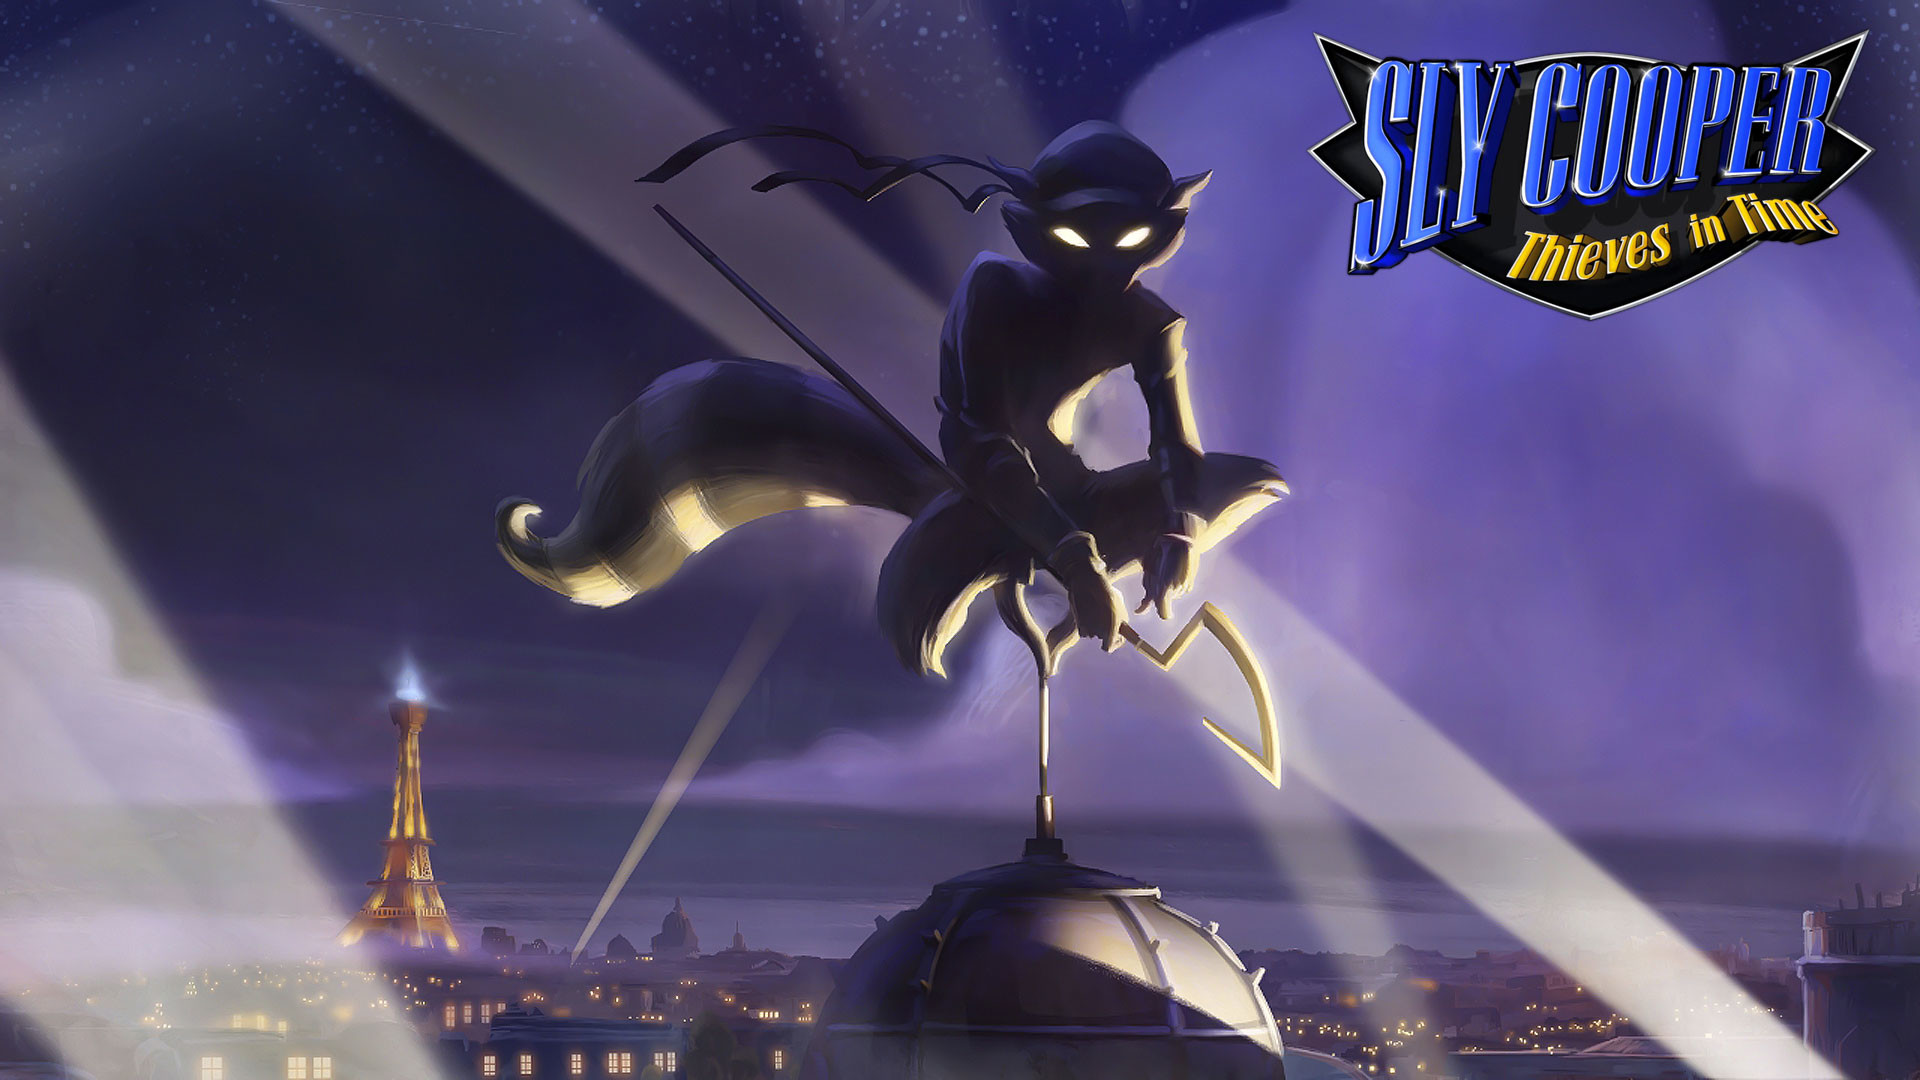 5 Sly Cooper Thieves in Time HD Wallpapers Backgrounds – Wallpaper Abyss